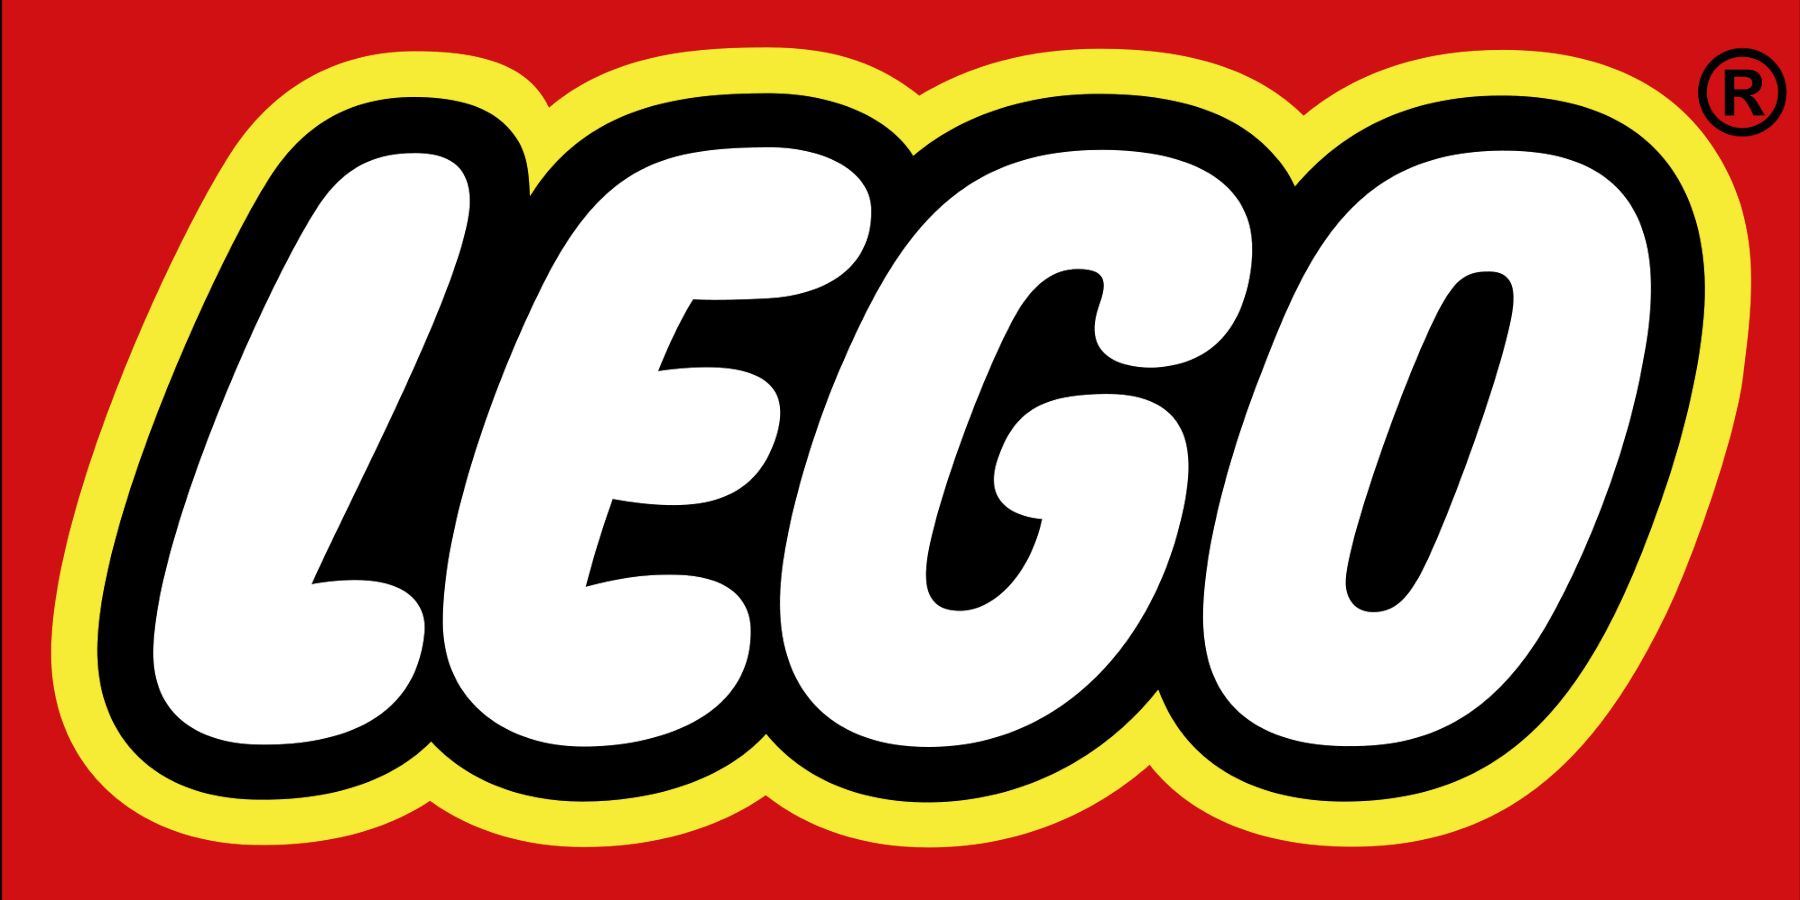 lego logo red and yellow